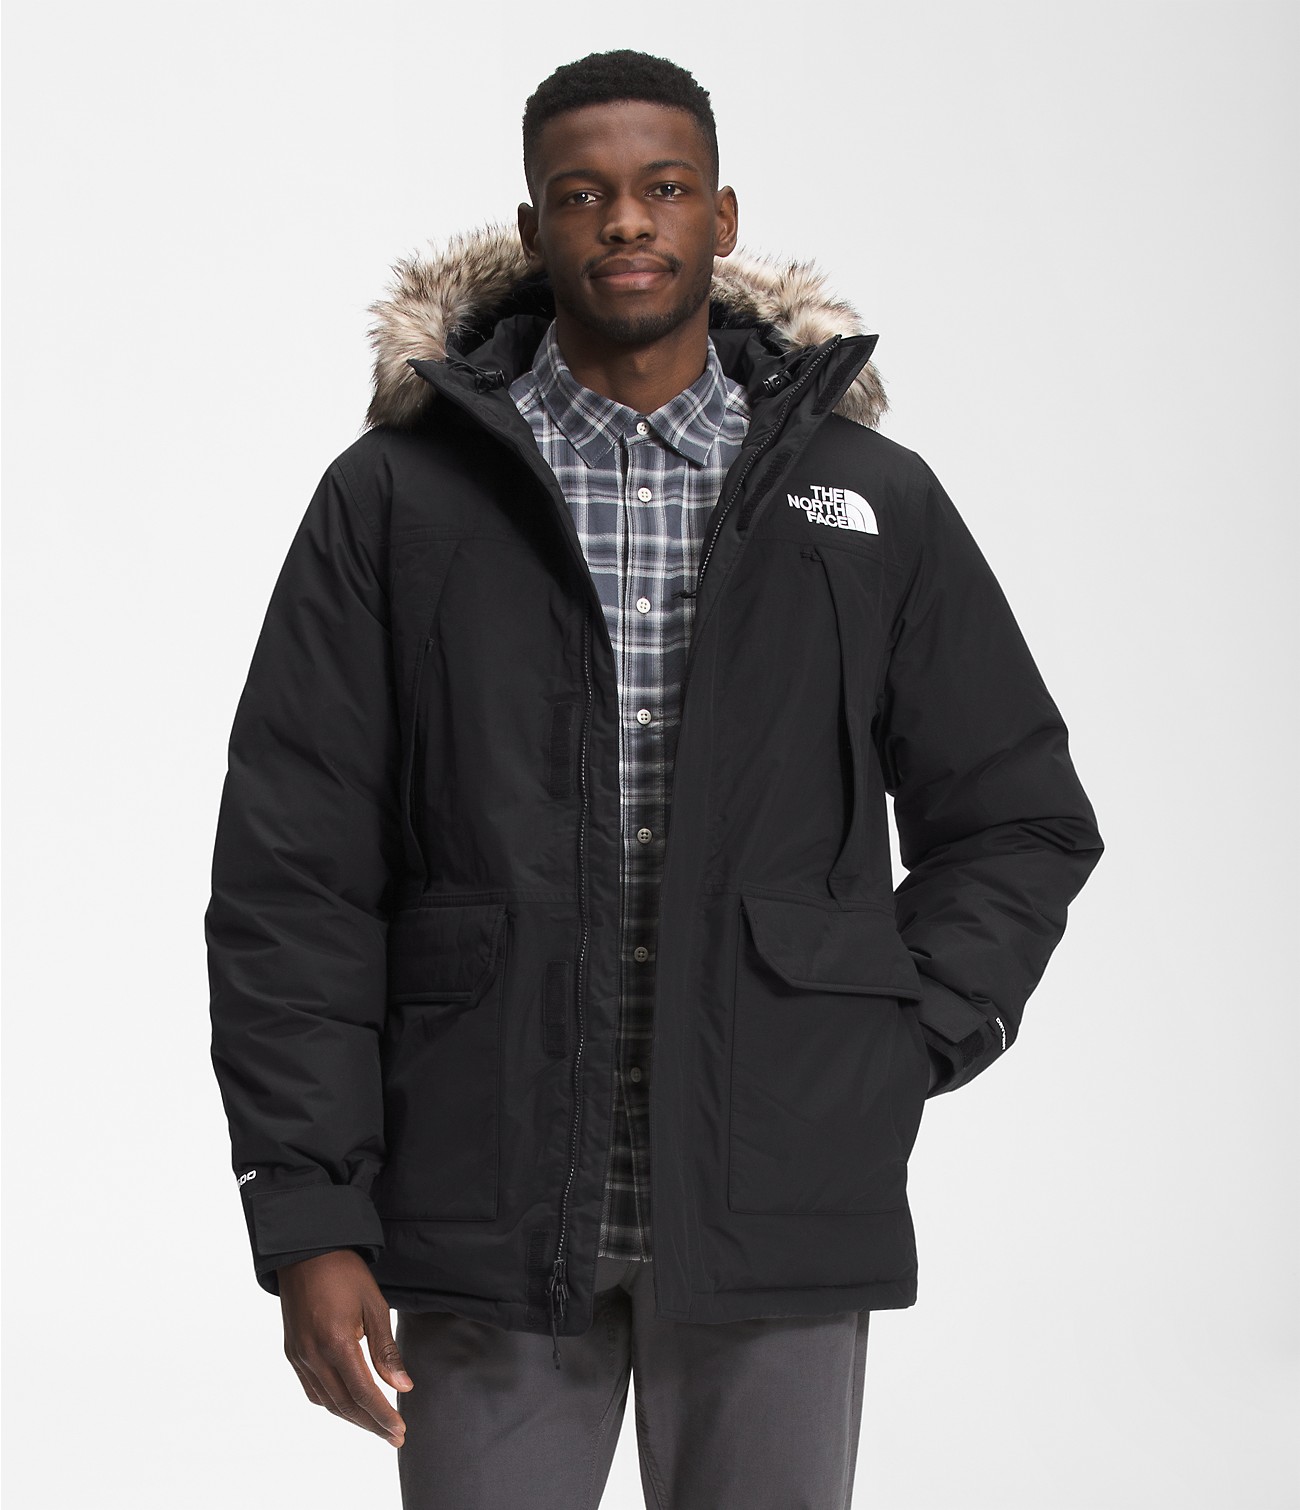 Unlock Wilderness' choice in the Woolrich Vs North Face comparison, the McMurdo Parka by The North Face